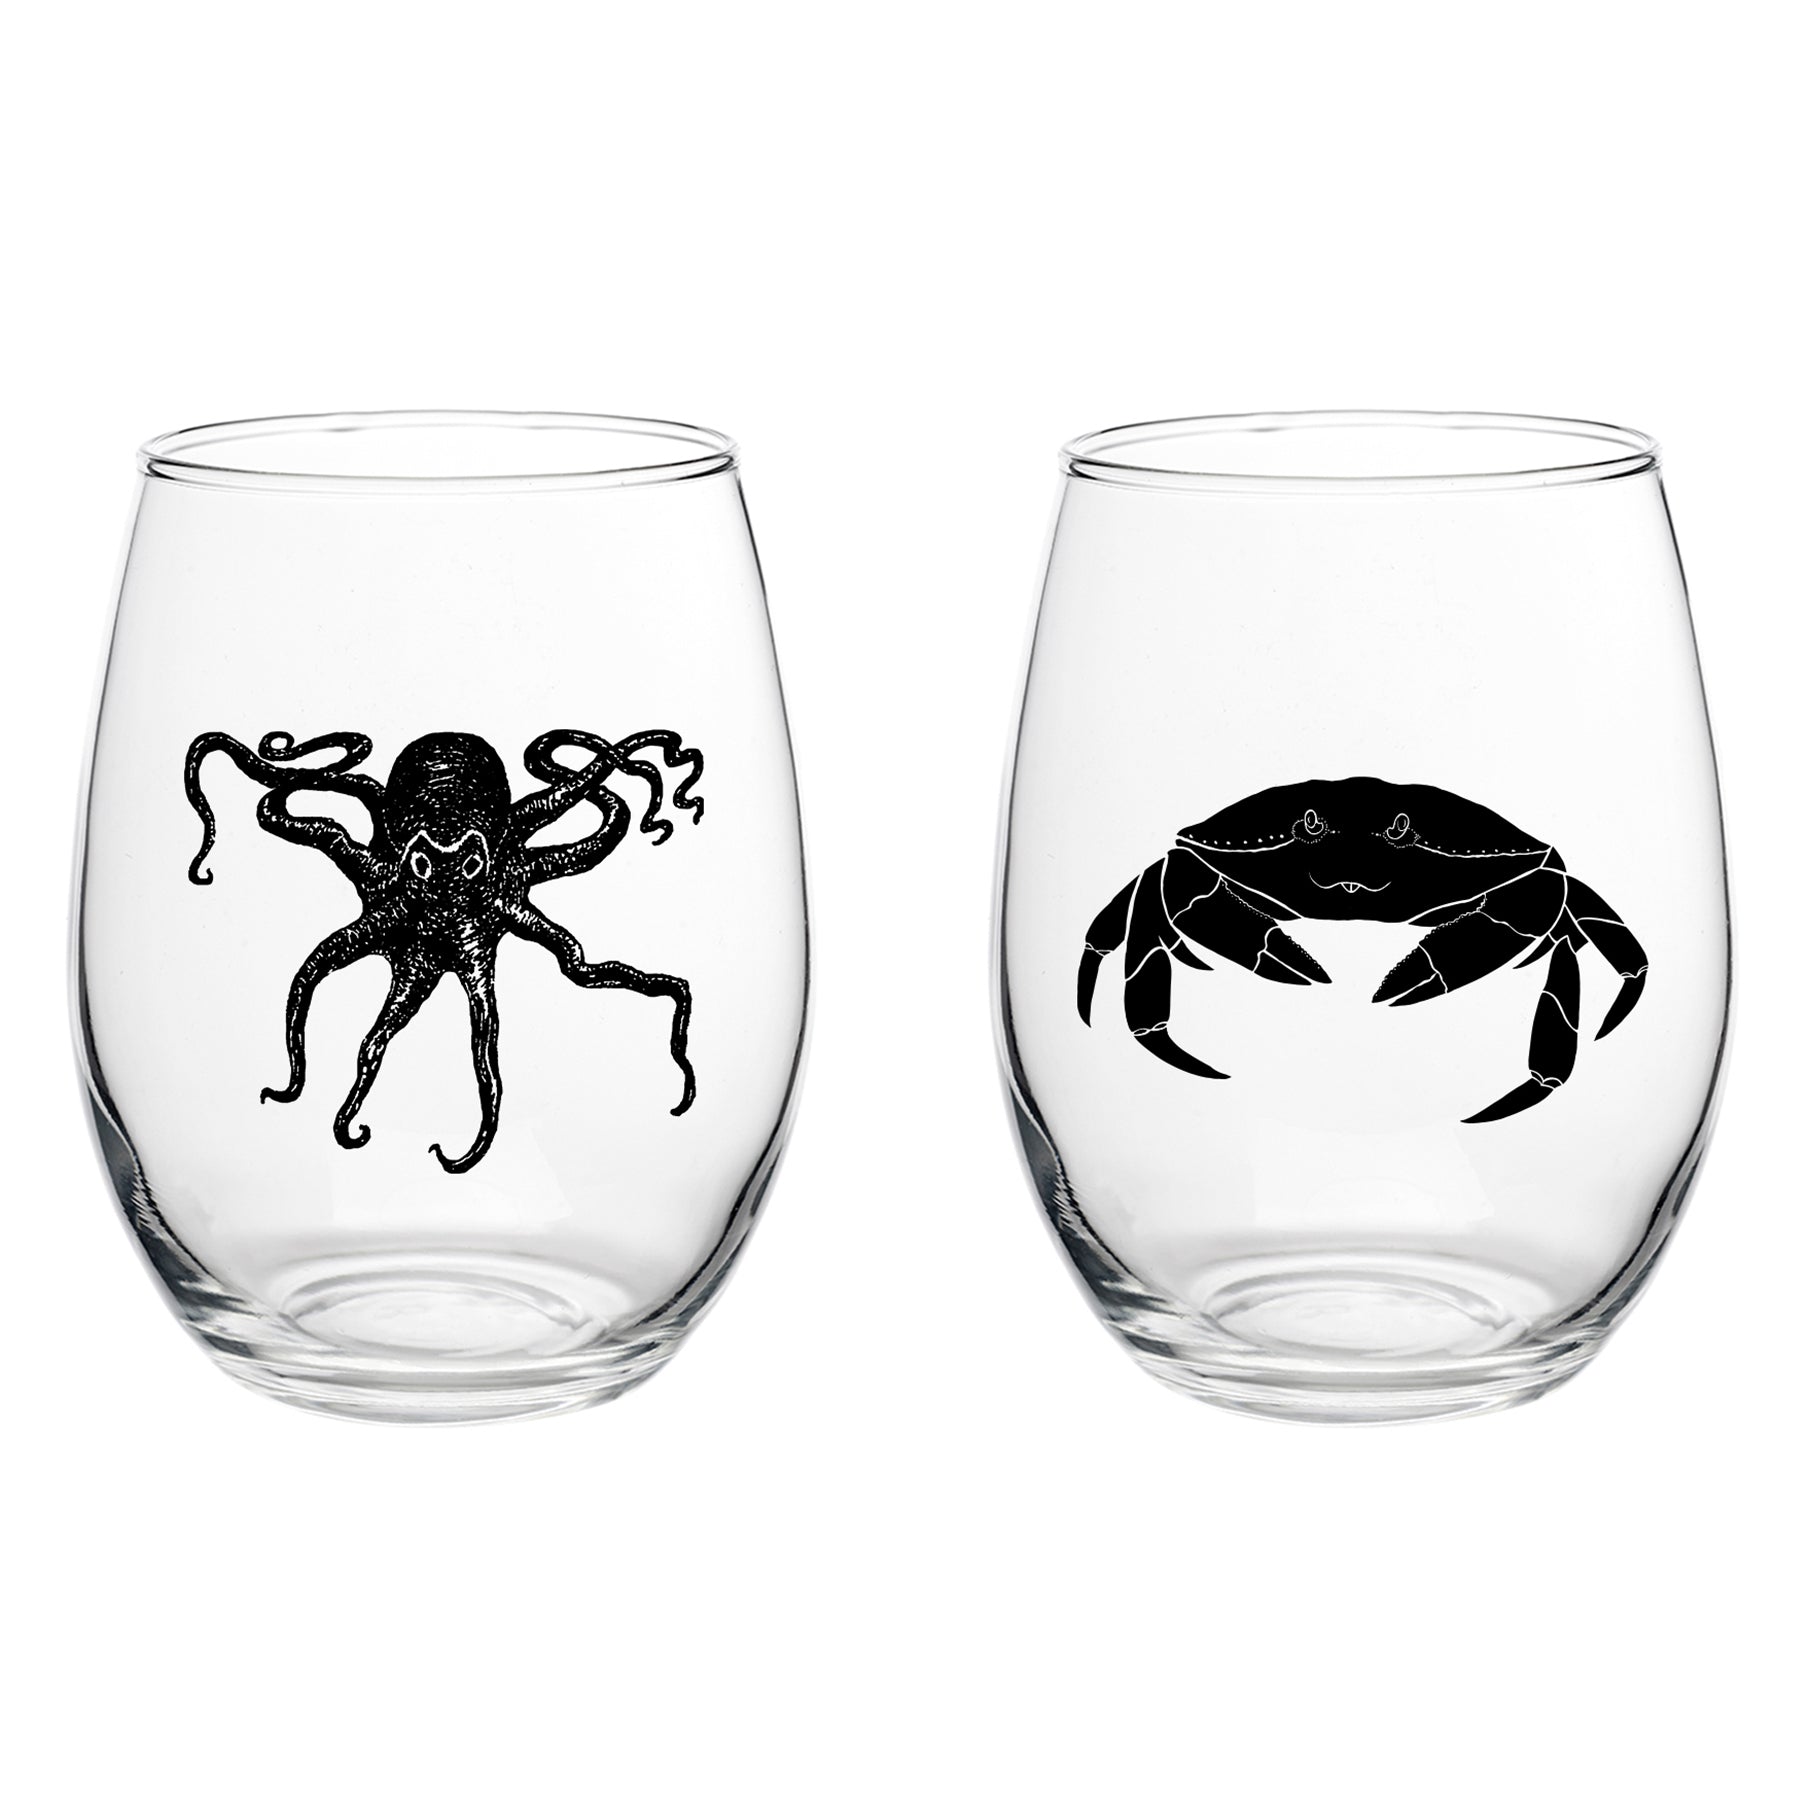 Octo Crab Stemless Wine Glassware Boxed Sets